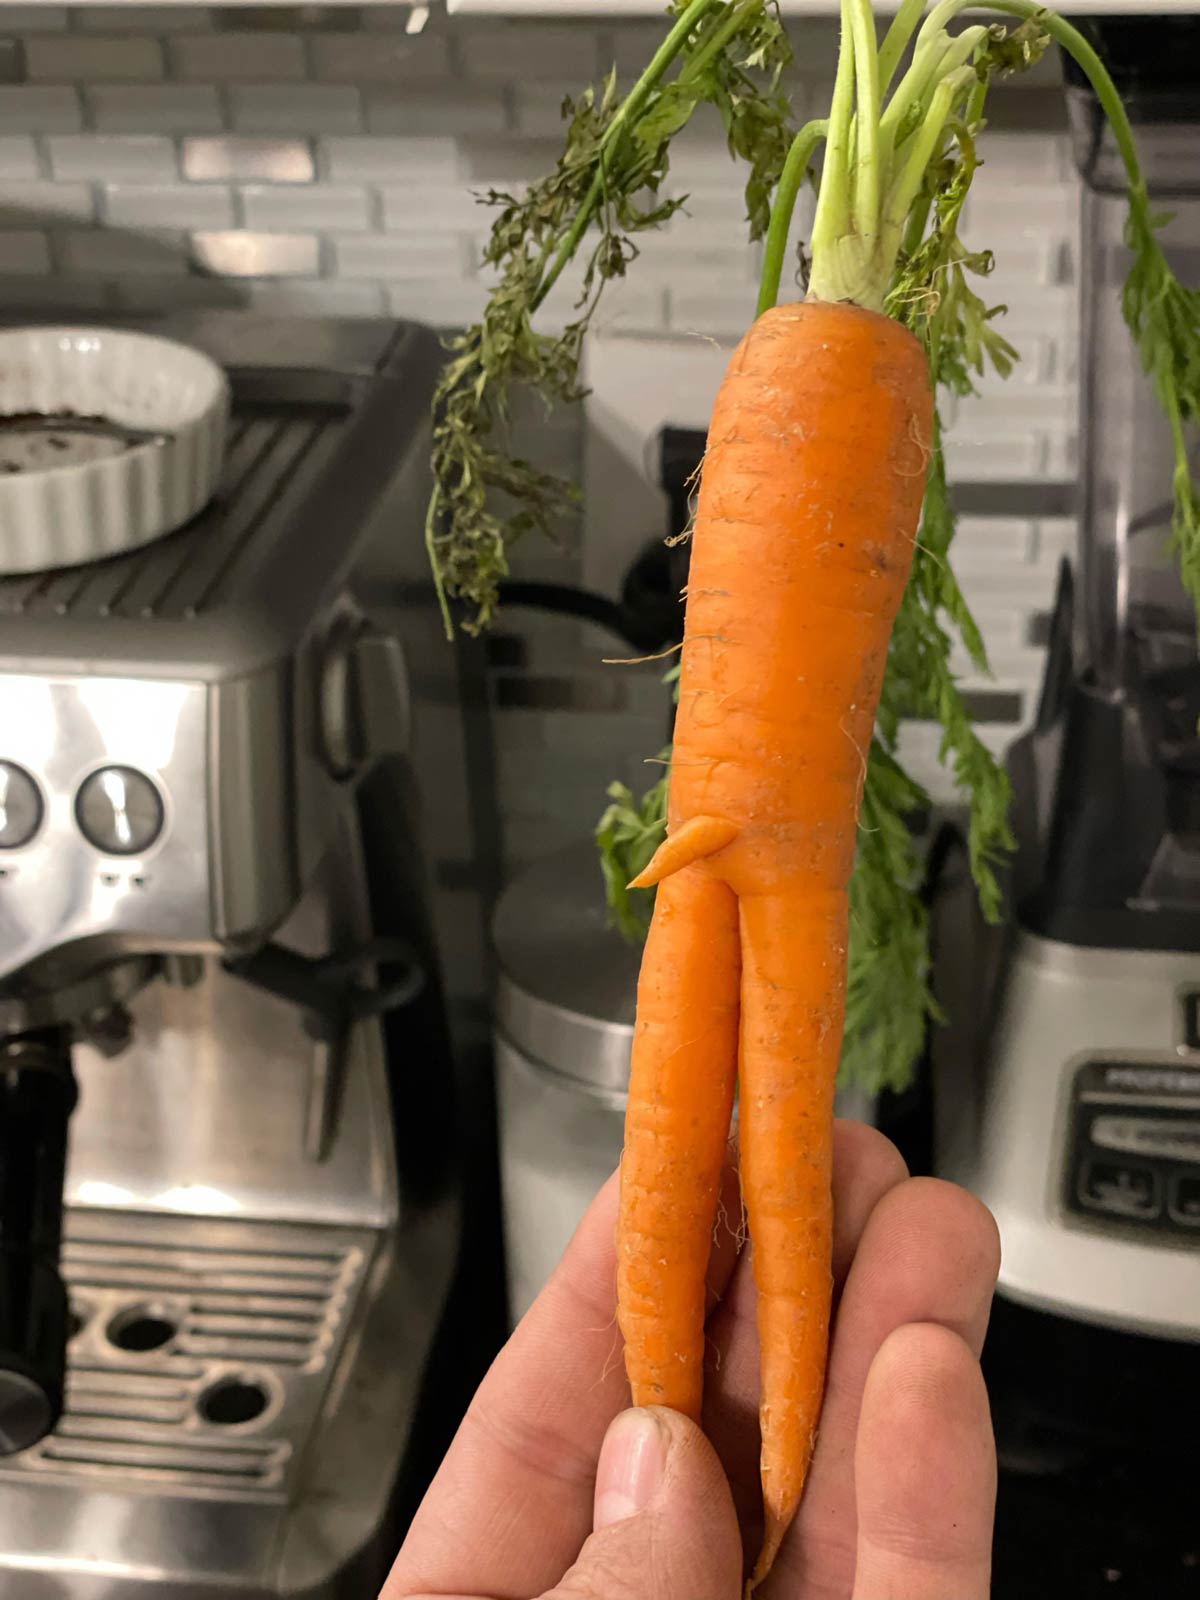 It might be small but I don’t carrot all